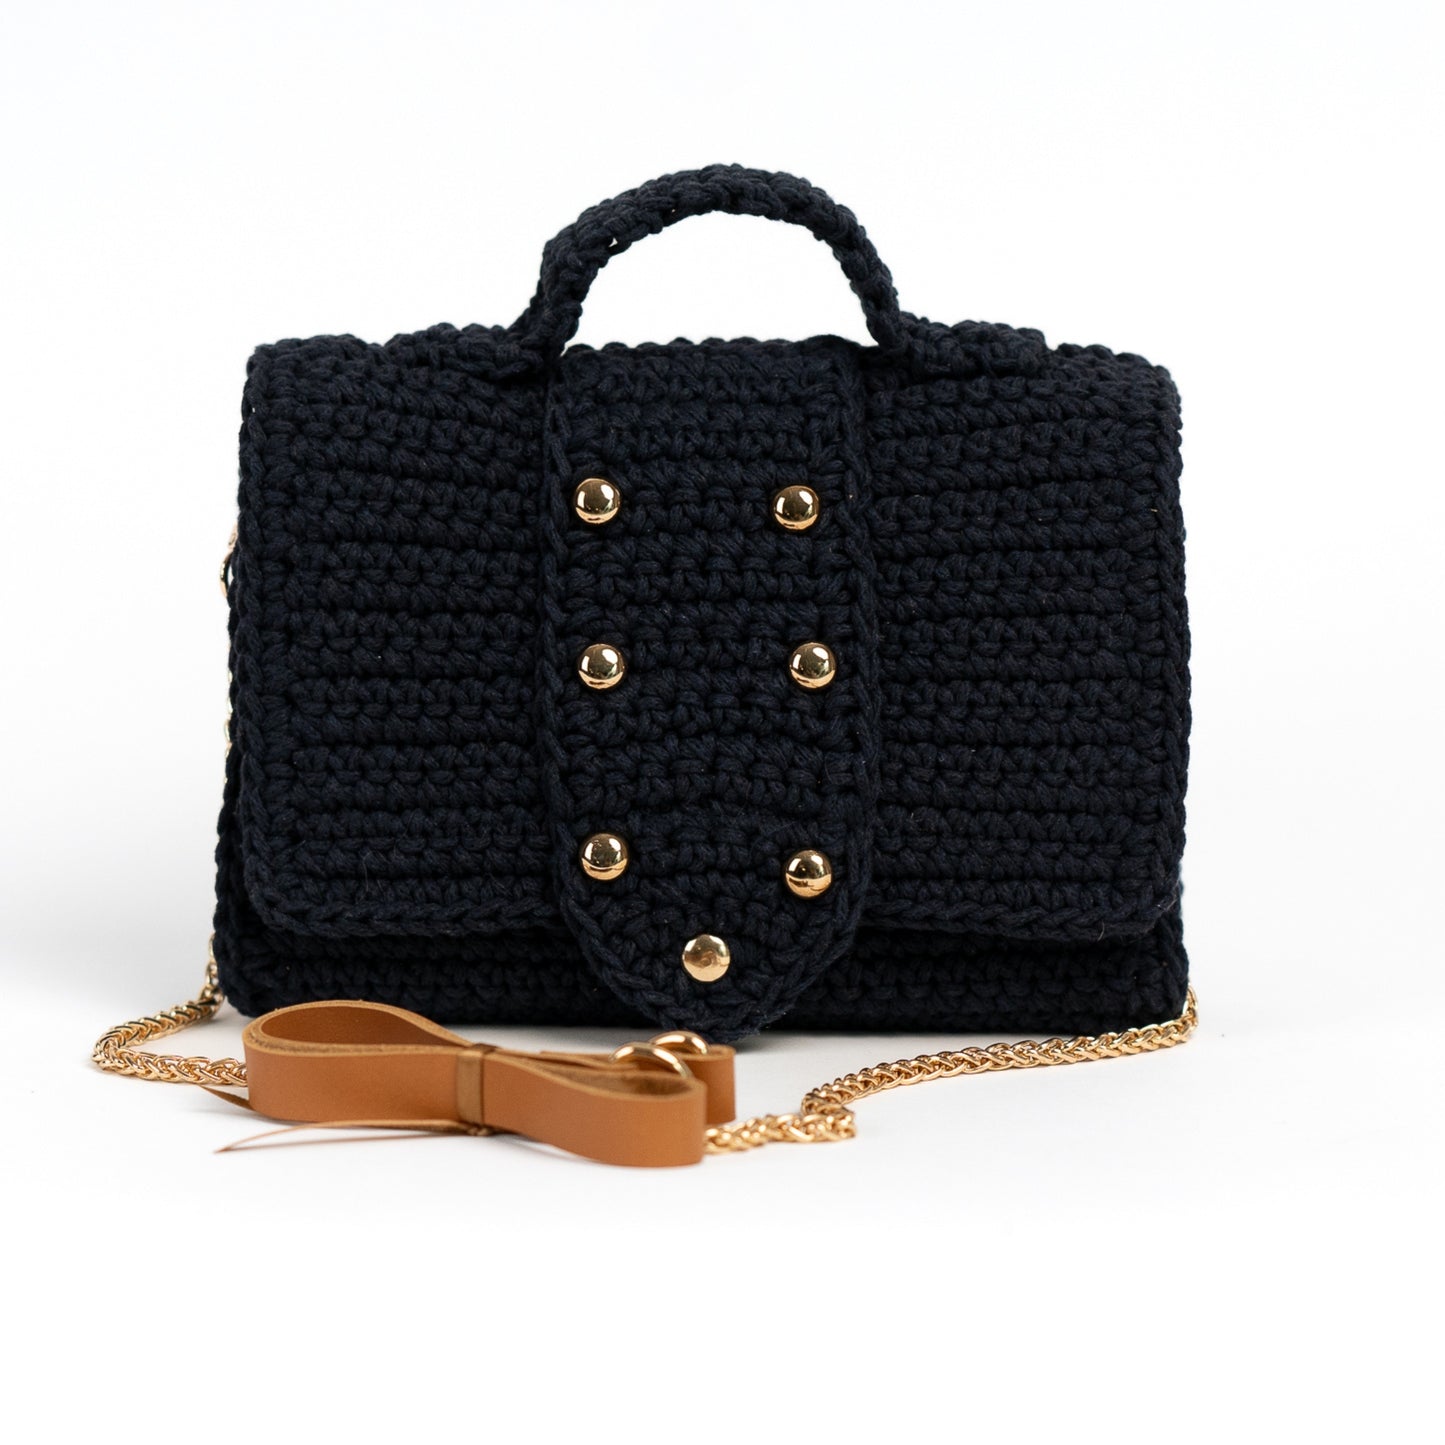 SAC BANDOULIERE MARINE LUXE